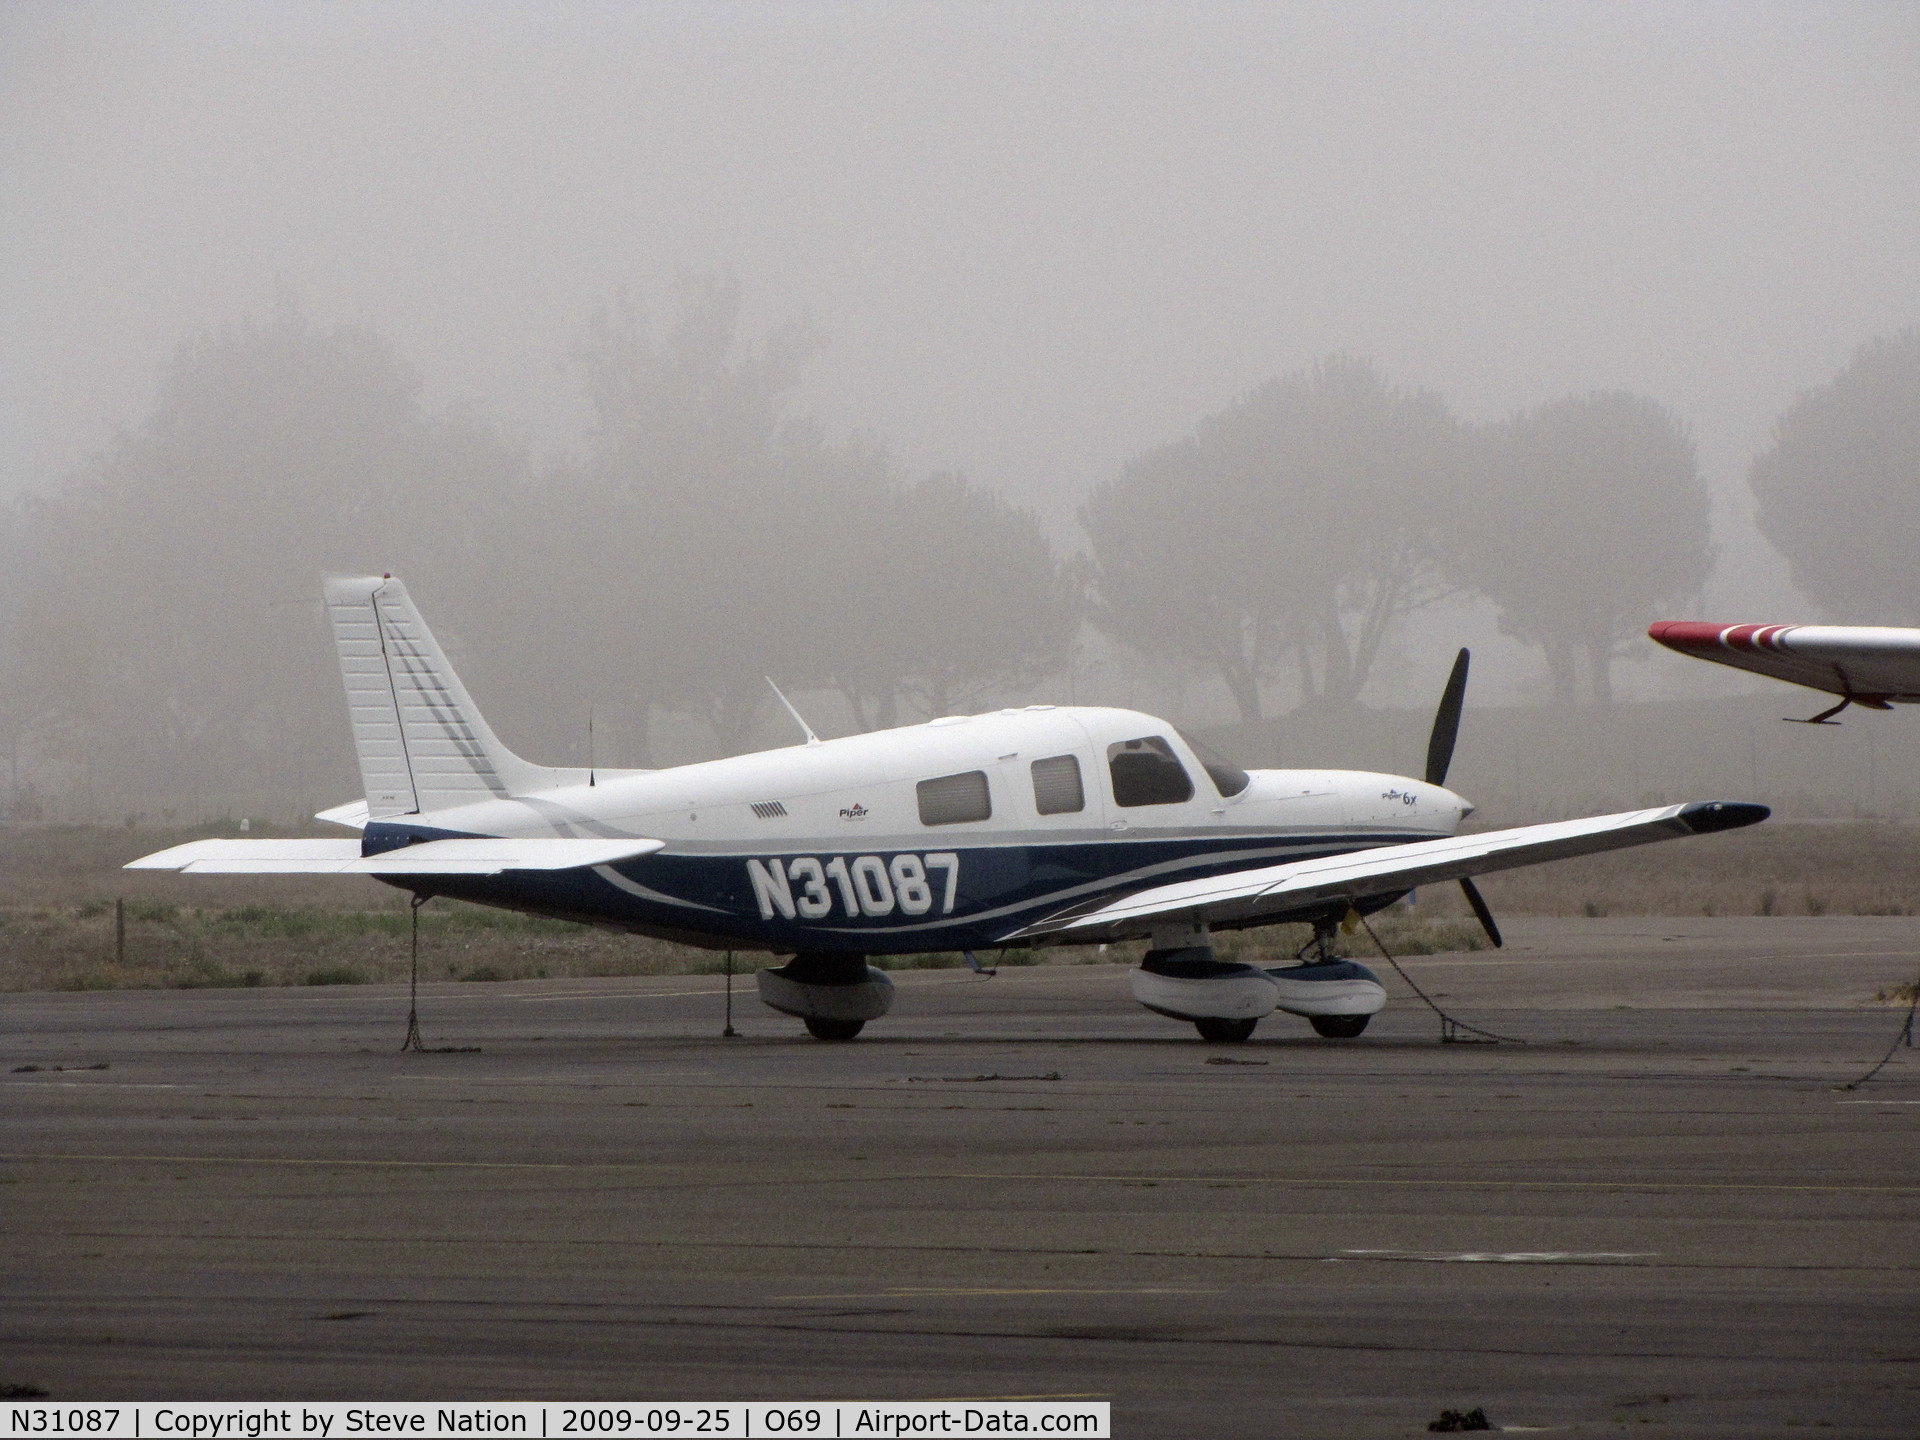 N31087, 2005 Piper PA-32-301FT Saratoga C/N 3232044, 2005 Piper PA-32-301FT visiting from KOAK in heavy morning ground fog